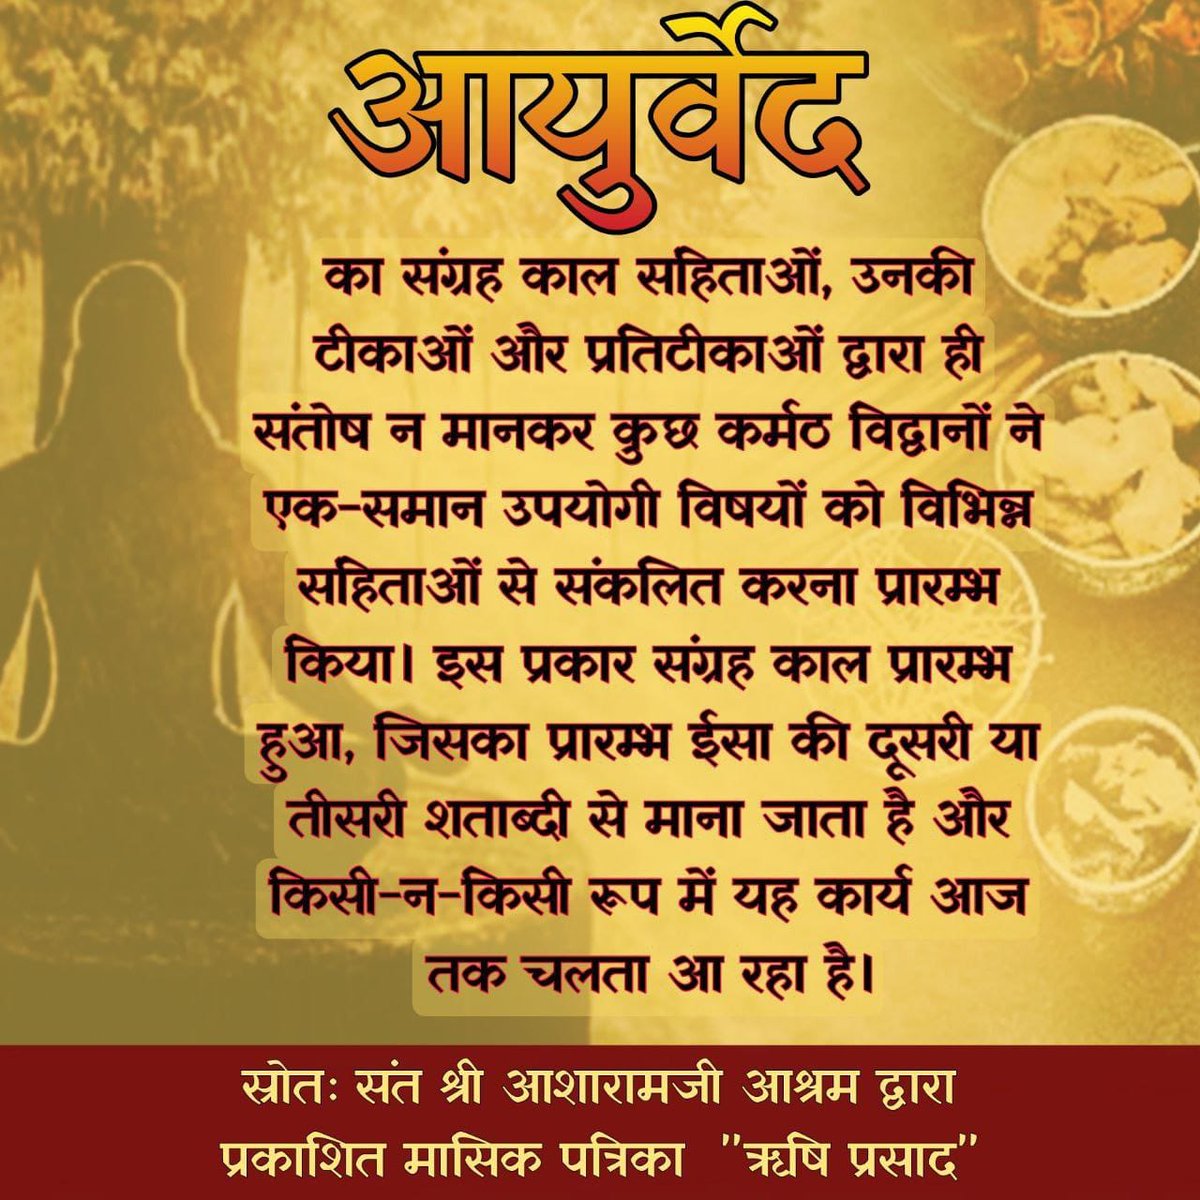 #AyurvedaForWellness
Sant Shri Asharamji Bapu always supports Ayurvedic Treatment method because it is completely based on nature & has no side effects. All products of Ayurveda are natural & do not contain any type of adulteration .
It is Treasure Of Health 
Prakriti Ka Vardan